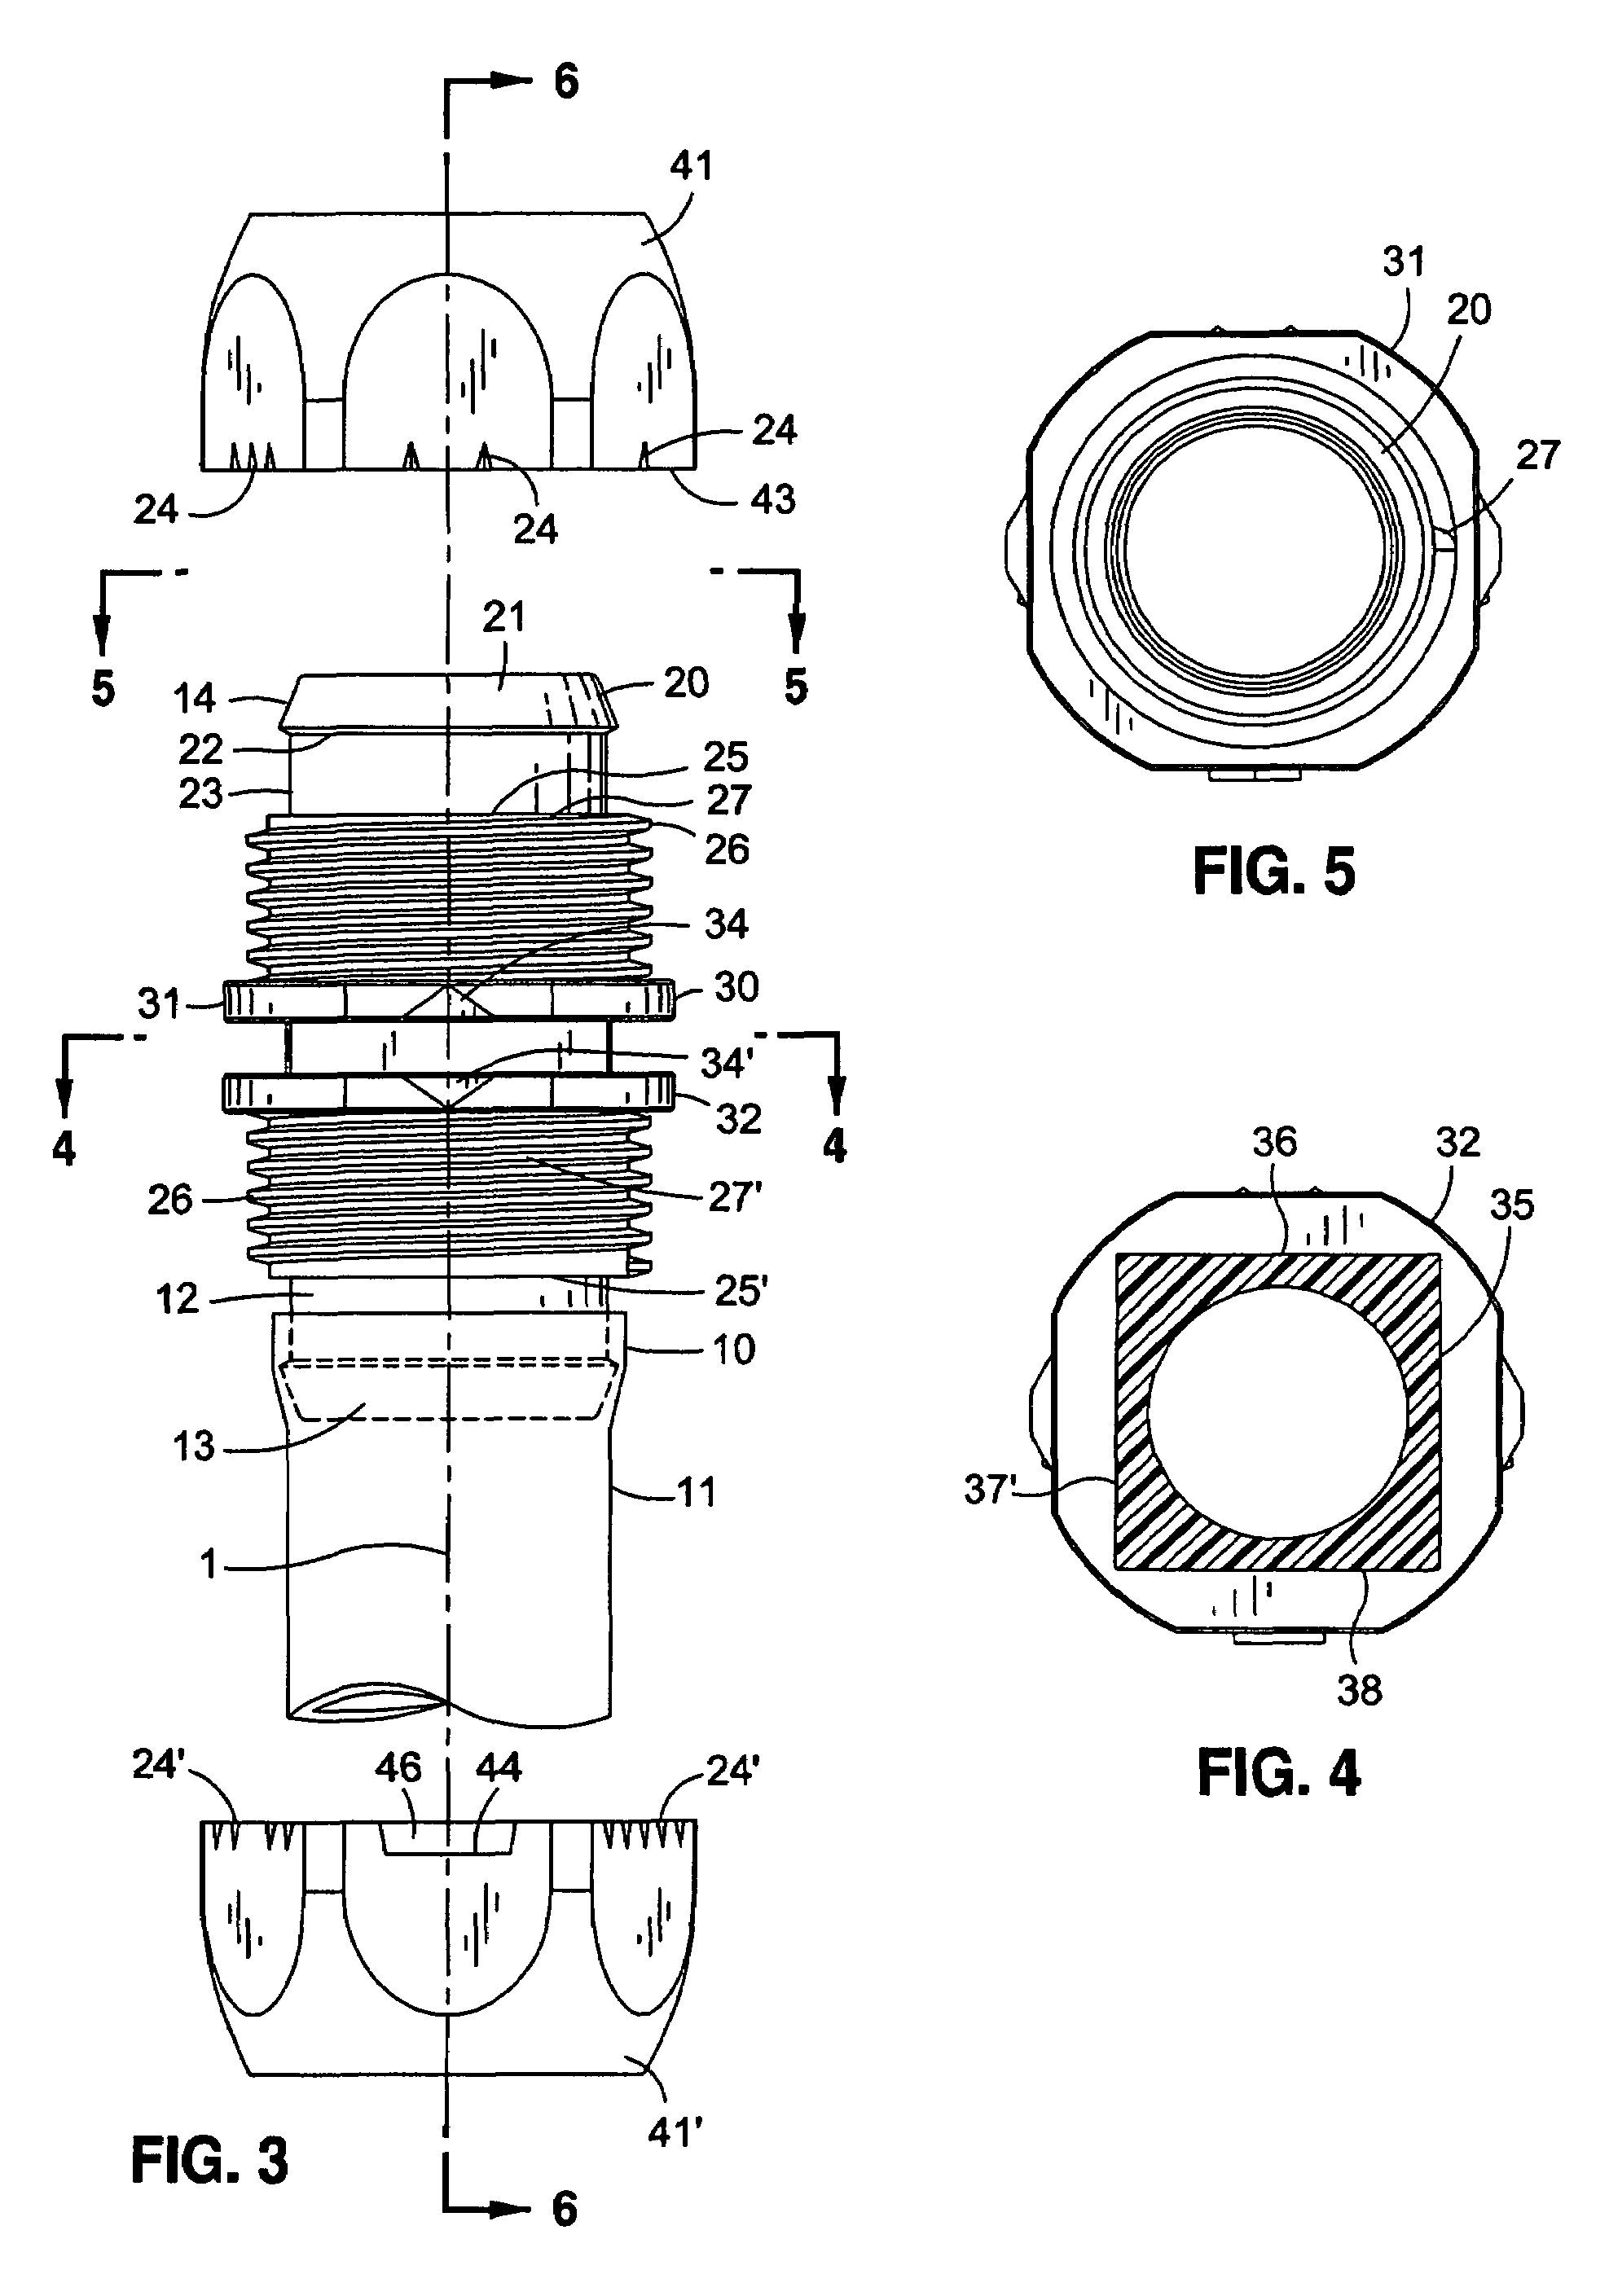 Connector for joining with agricultural drip tape